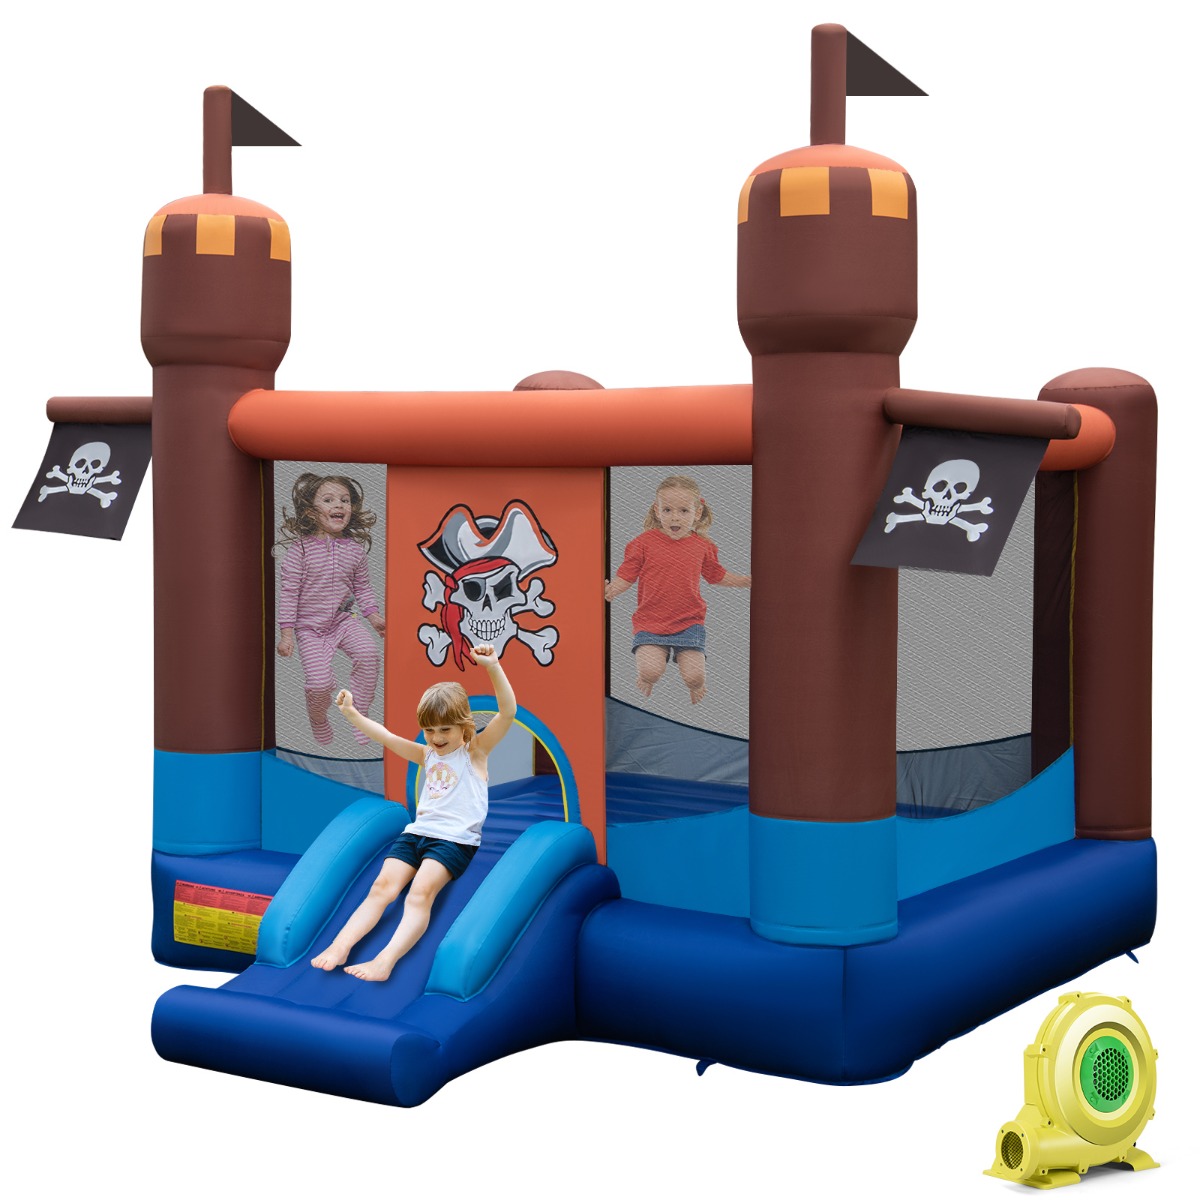 Inflatable Bounce Castle with Large Bounce Area and Basketball Hoop for Outdoor Play with Blower